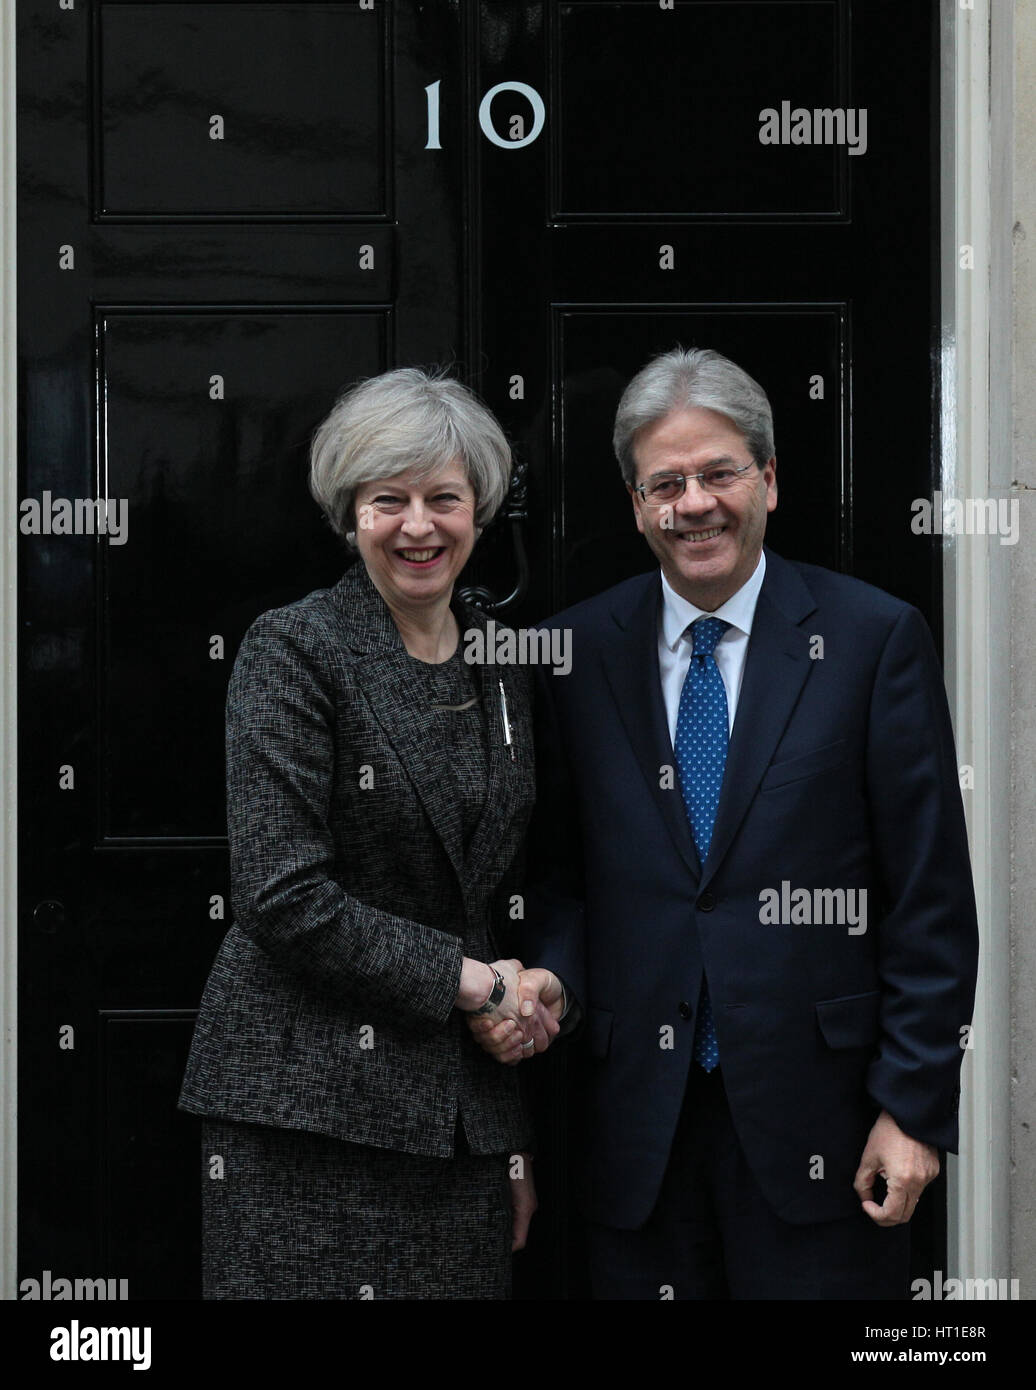 Prime Minister Theresa May and Prime Minister of Italy Paolo Gentiloni at No.10 Downing street on 9th February 2017 in London Stock Photo